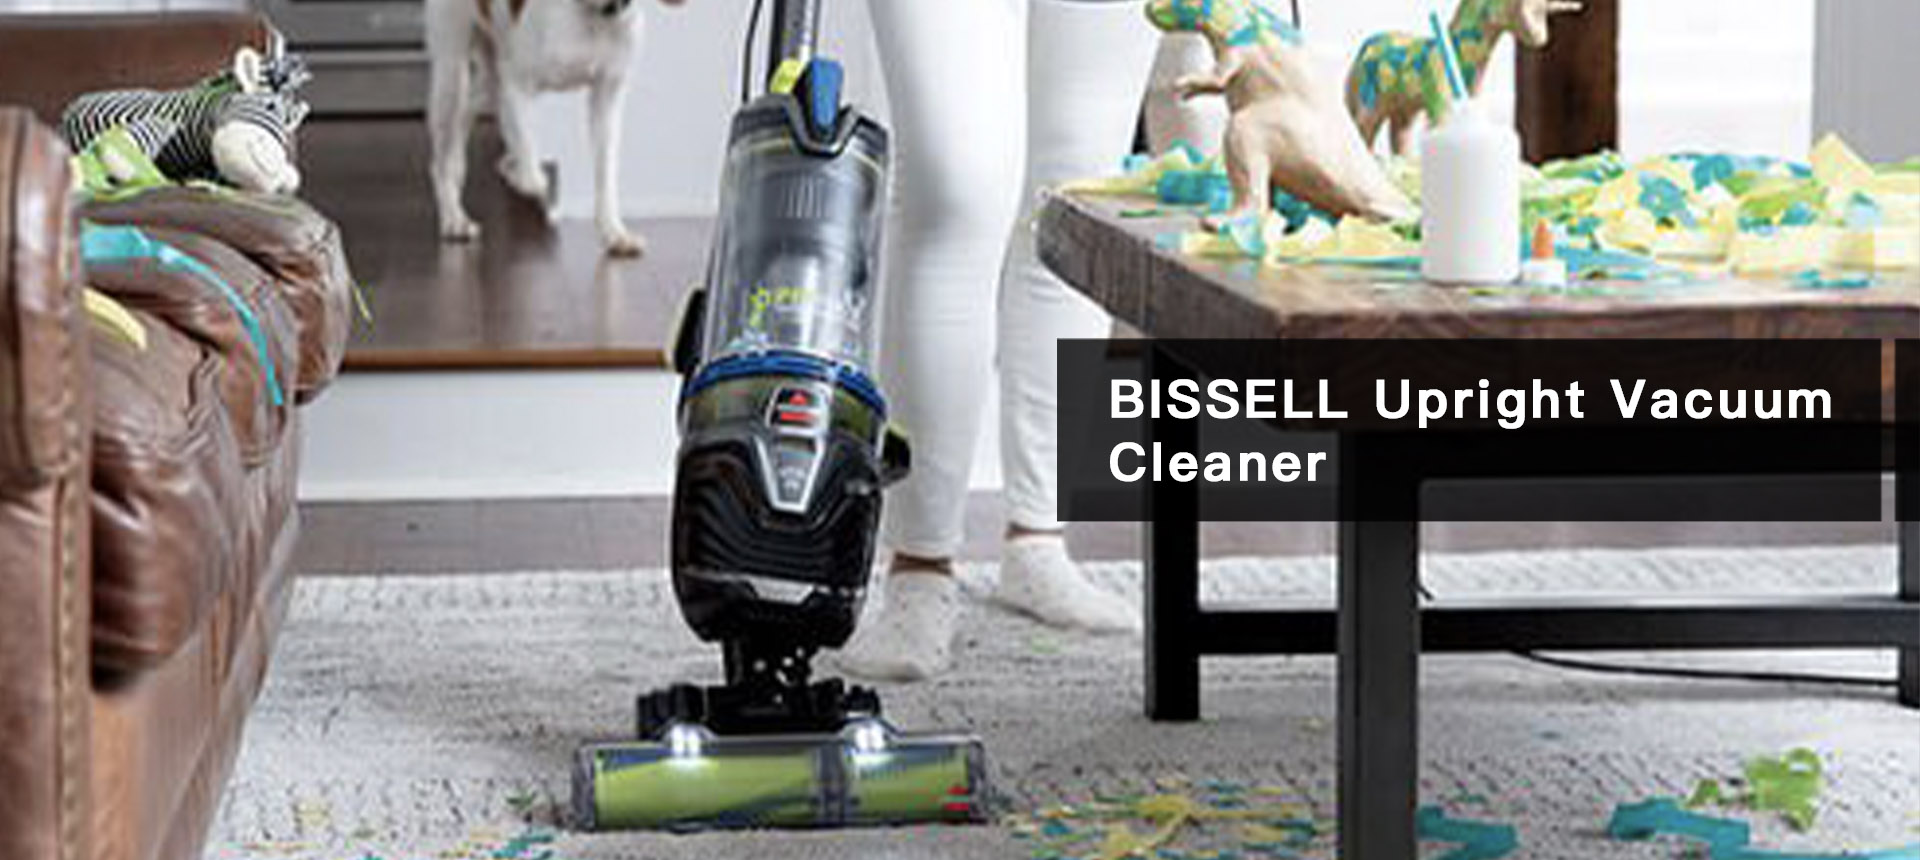 BISSELL Upright Vacuum Cleaner